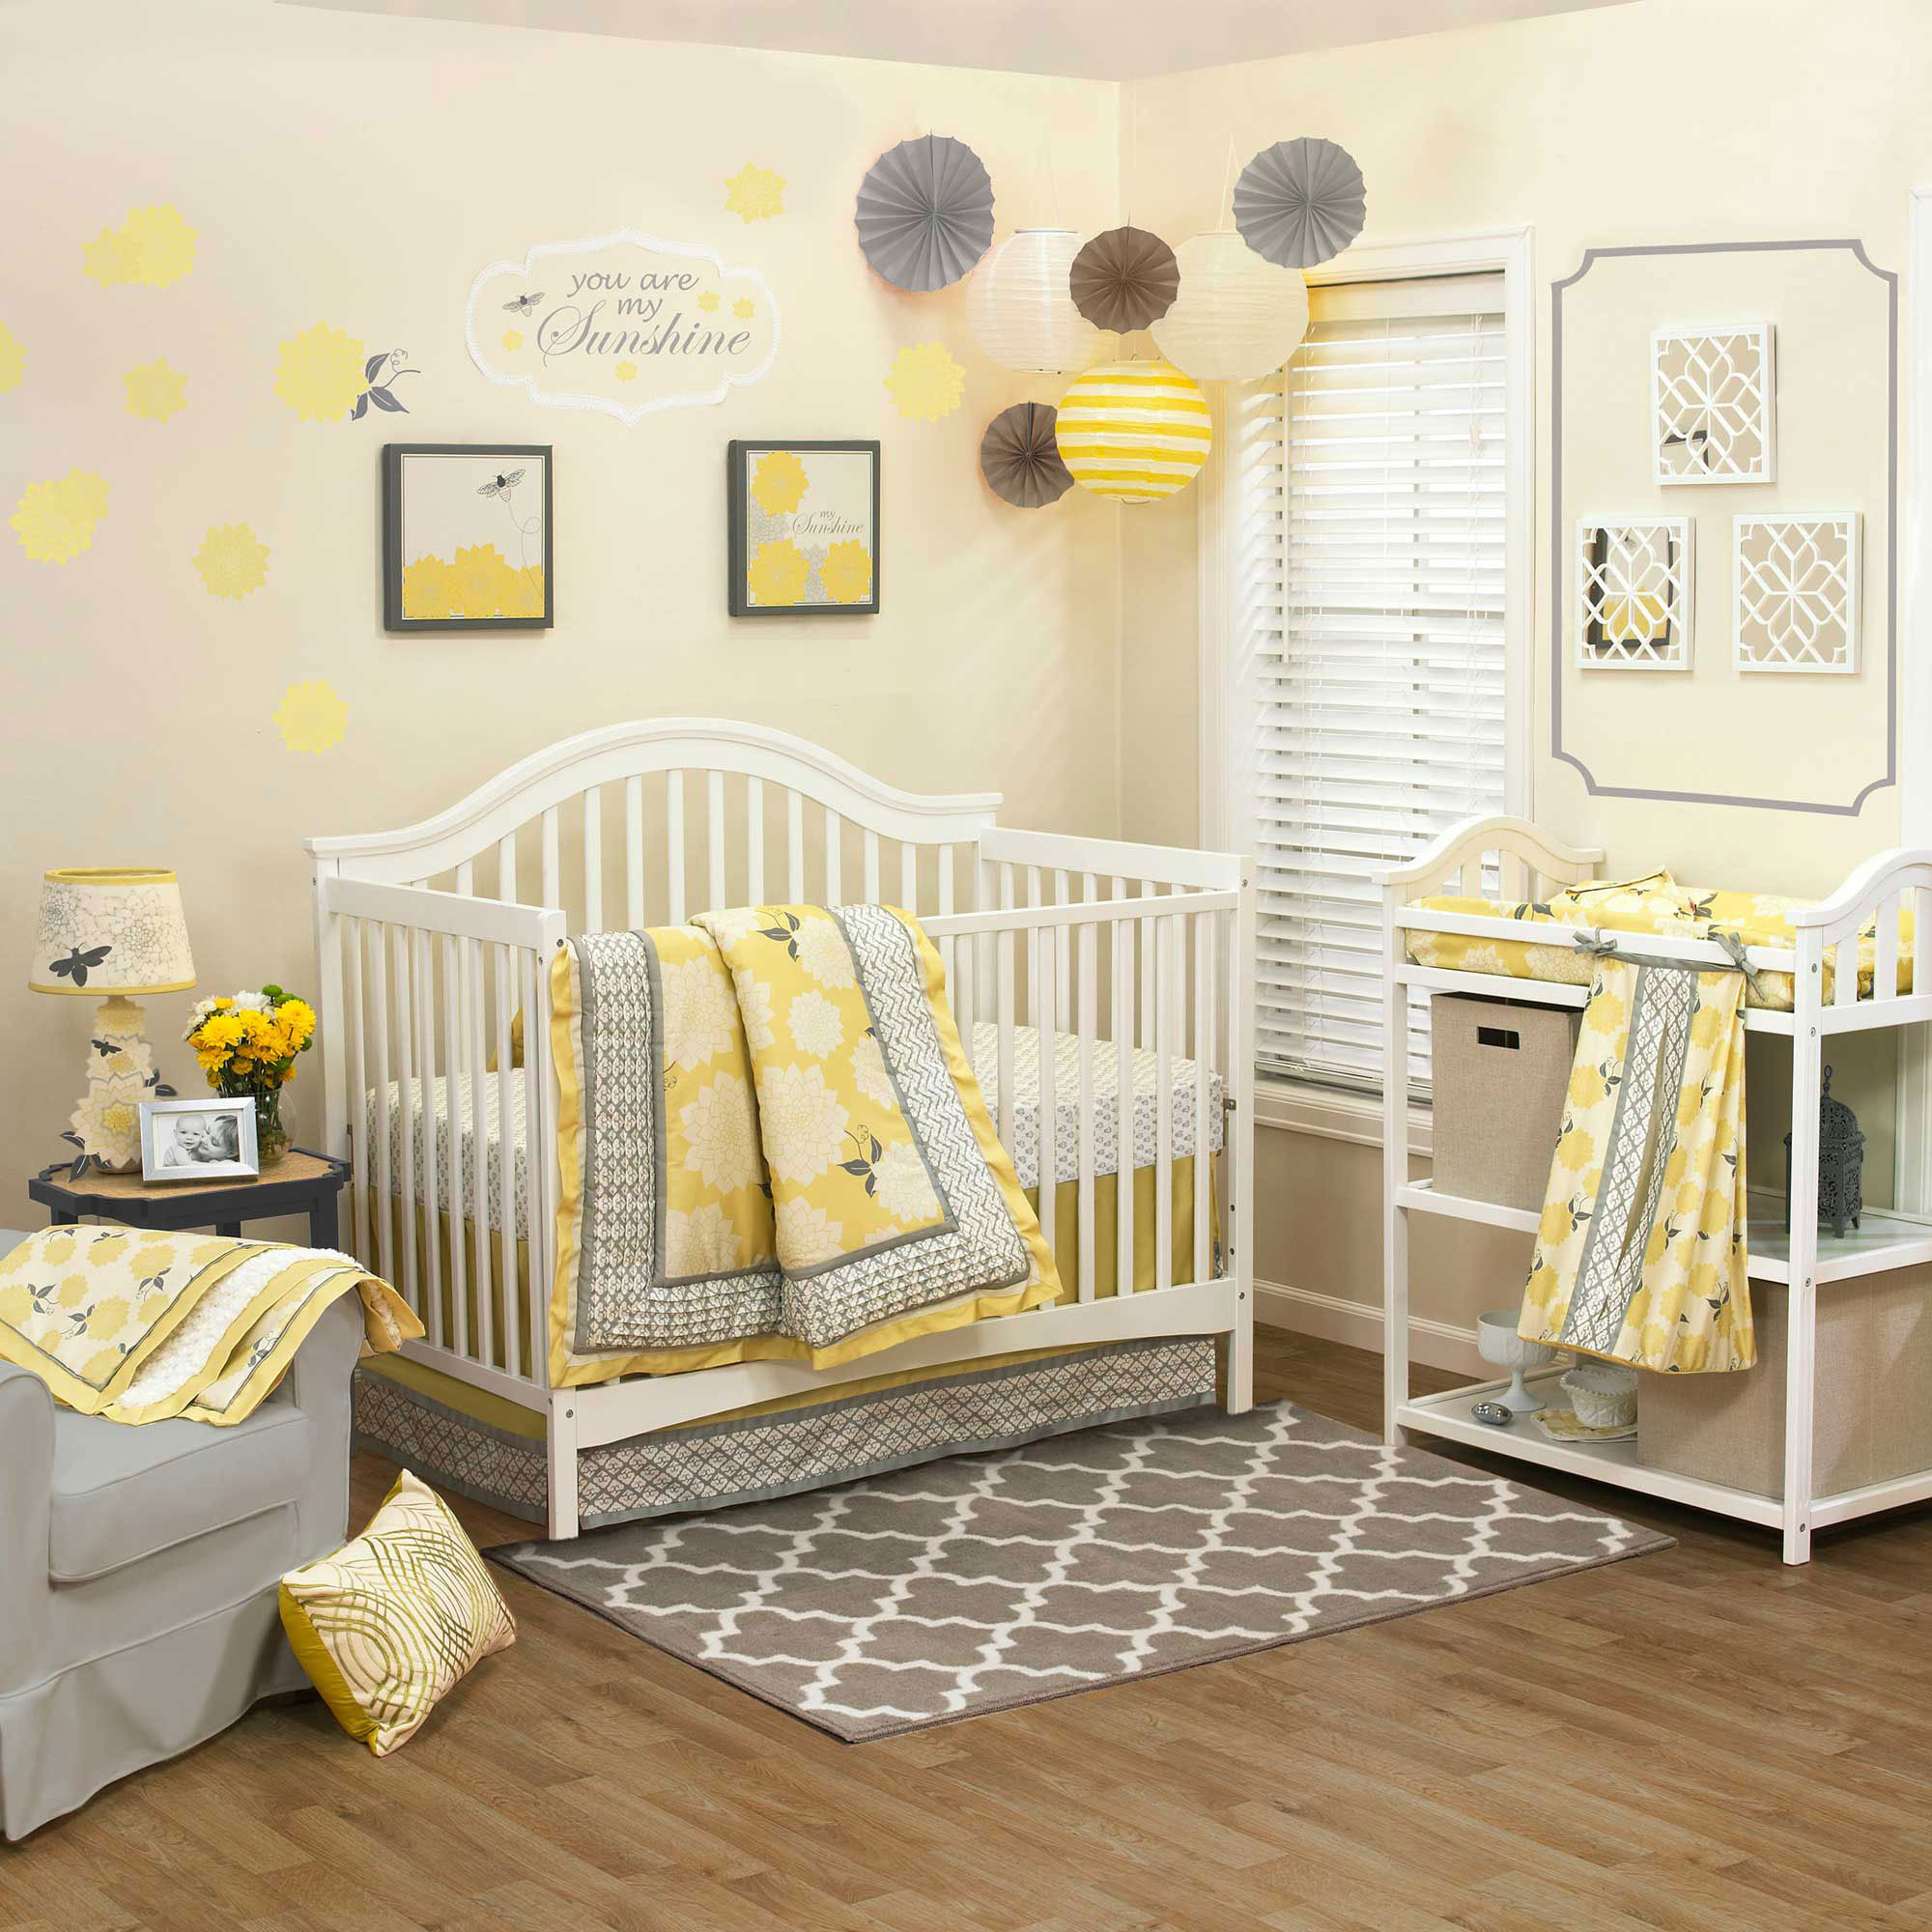 Baby Room Decoration Girl
 Baby Girl Nursery Ideas 10 Pretty Examples Decorating Room